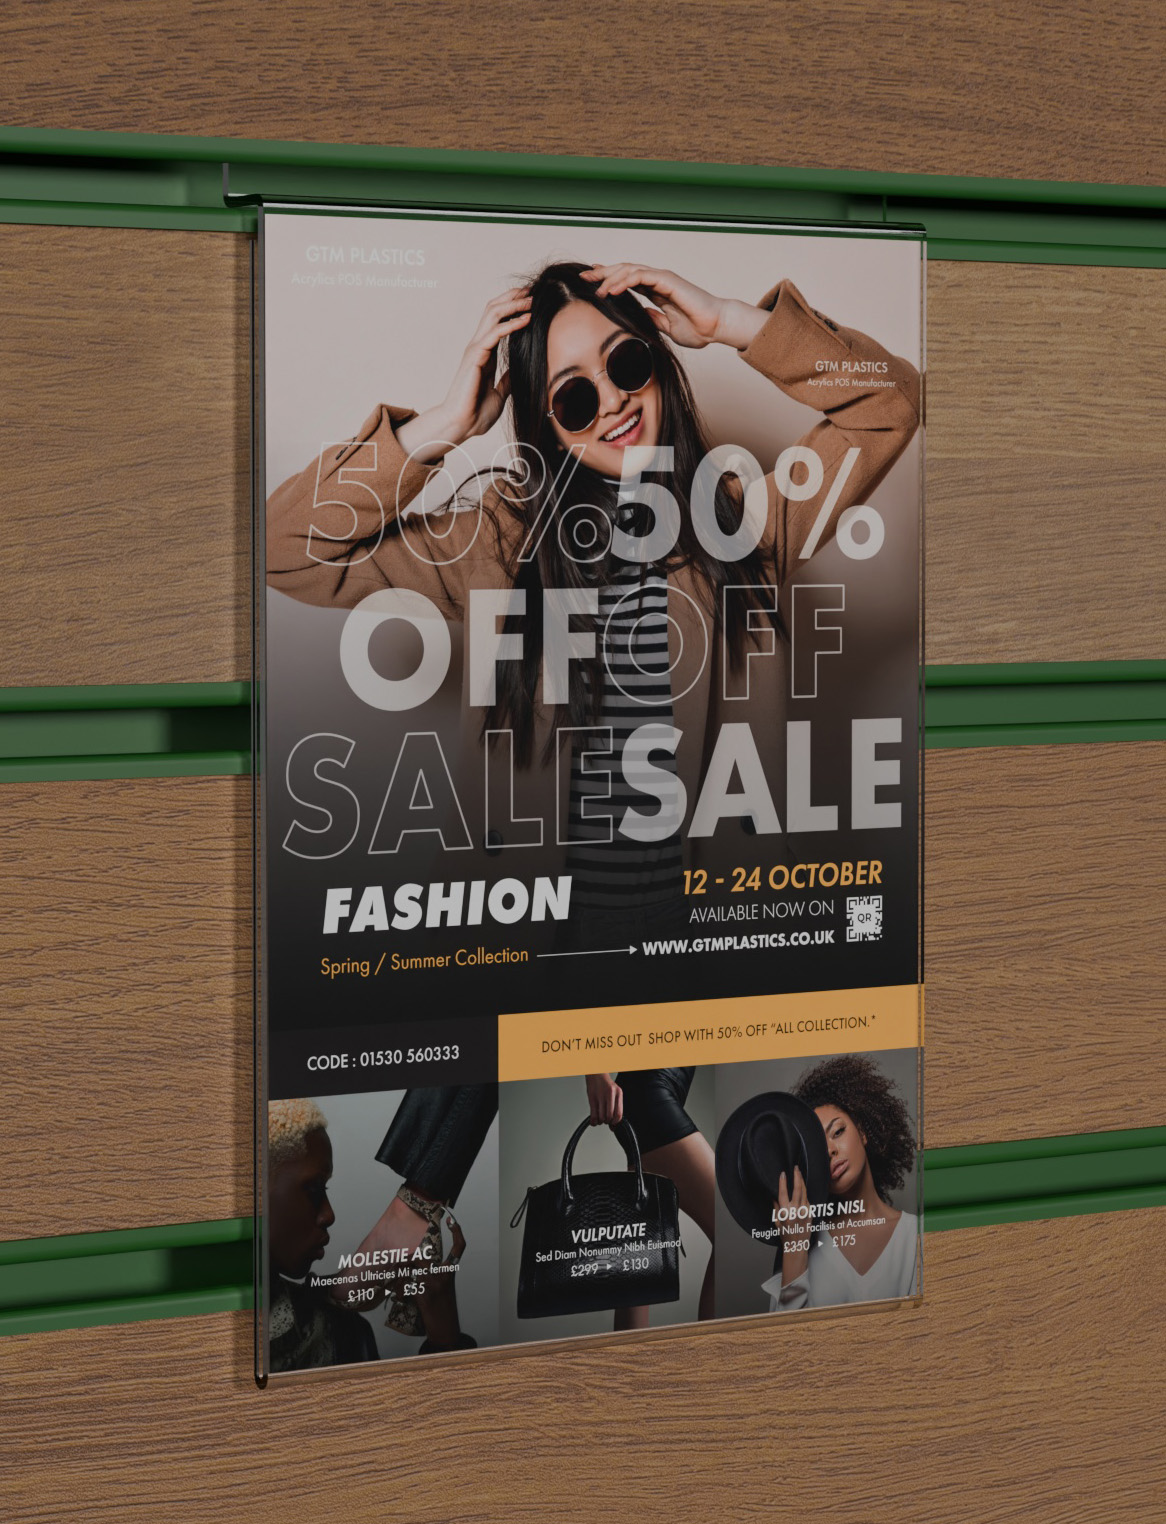 An acrylic slatwall poster holder slotted into a brown wooden board which has green inserts. The poster shows people wearing various fashionable clothes for sale.